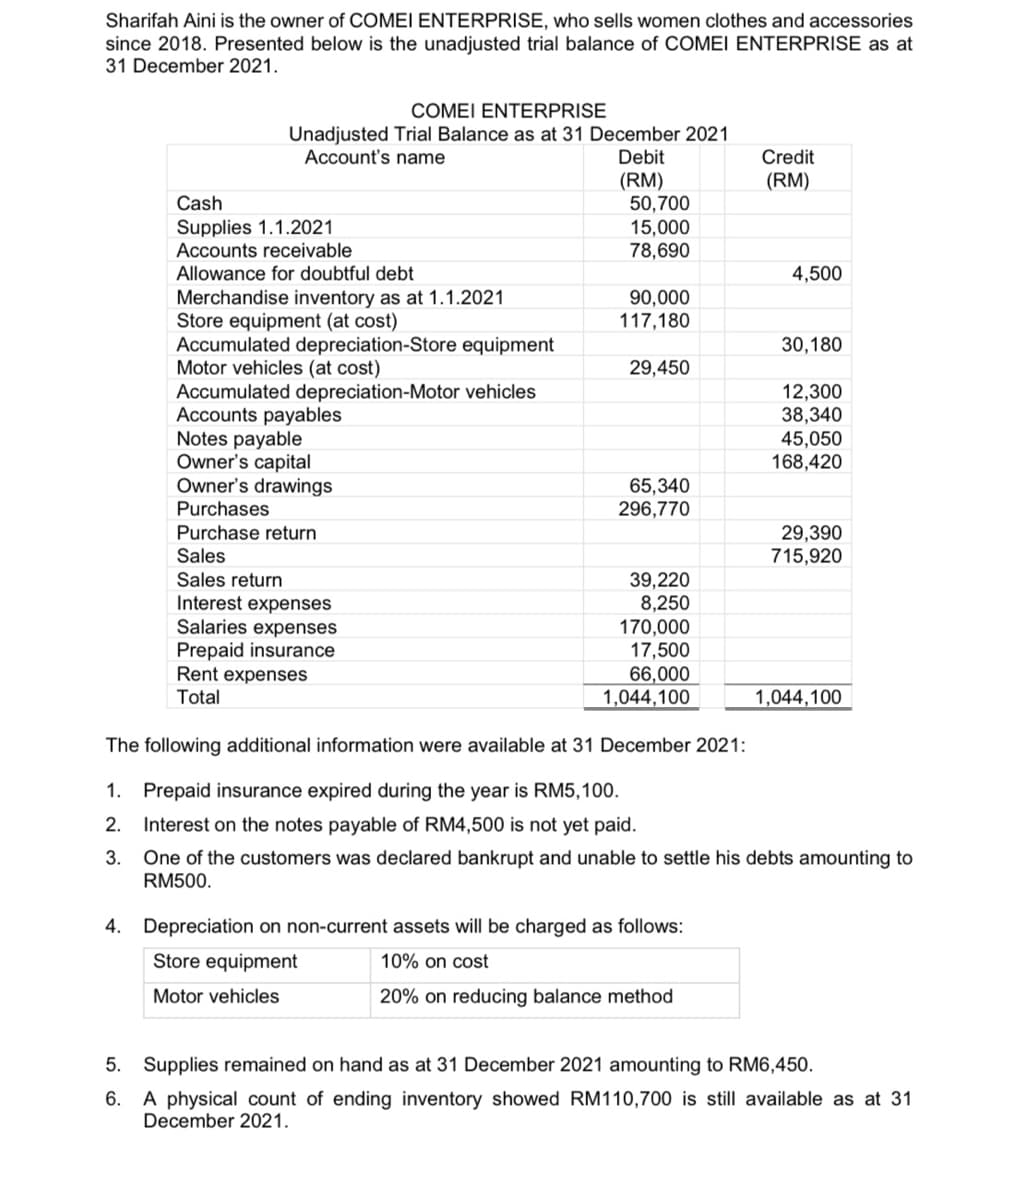 Sharifah Aini is the owner of COMEI ENTERPRISE, who sells women clothes and accessories
since 2018. Presented below is the unadjusted trial balance of COMEI ENTERPRISE as at
31 December 2021.
COMEI ENTERPRISE
Unadjusted Trial Balance as at 31 December 2021
Account's name
Debit
Credit
(RM)
50,700
15,000
78,690
(RM)
Cash
Supplies 1.1.2021
Accounts receivable
Allowance for doubtful debt
4,500
90,000
117,180
Merchandise inventory as at 1.1.2021
Store equipment (at cost)
Accumulated depreciation-Store equipment
Motor vehicles (at cost)
Accumulated depreciation-Motor vehicles
Accounts payables
Notes payable
Owner's capital
Owner's drawings
Purchases
30,180
29,450
12,300
38,340
45,050
168,420
65,340
296,770
Purchase return
29,390
715,920
Sales
Sales return
Interest expenses
Salaries expenses
39,220
8,250
170,000
17,500
66,000
1,044,100
Prepaid insurance
Rent expenses
Total
1,044,100
The following additional information were available at 31 December 2021:
1. Prepaid insurance expired during the year is RM5,100.
2. Interest on the notes payable of RM4,500 is not yet paid.
3.
One of the customers was declared bankrupt and unable to settle his debts amounting to
RM500.
4. Depreciation on non-current assets will be charged as follows:
Store equipment
10% on cost
Motor vehicles
20% on reducing balance method
5. Supplies remained on hand as at 31 December 2021 amounting to RM6,450.
6. A physical count of ending inventory showed RM110,700 is still available as at 31
December 2021.
